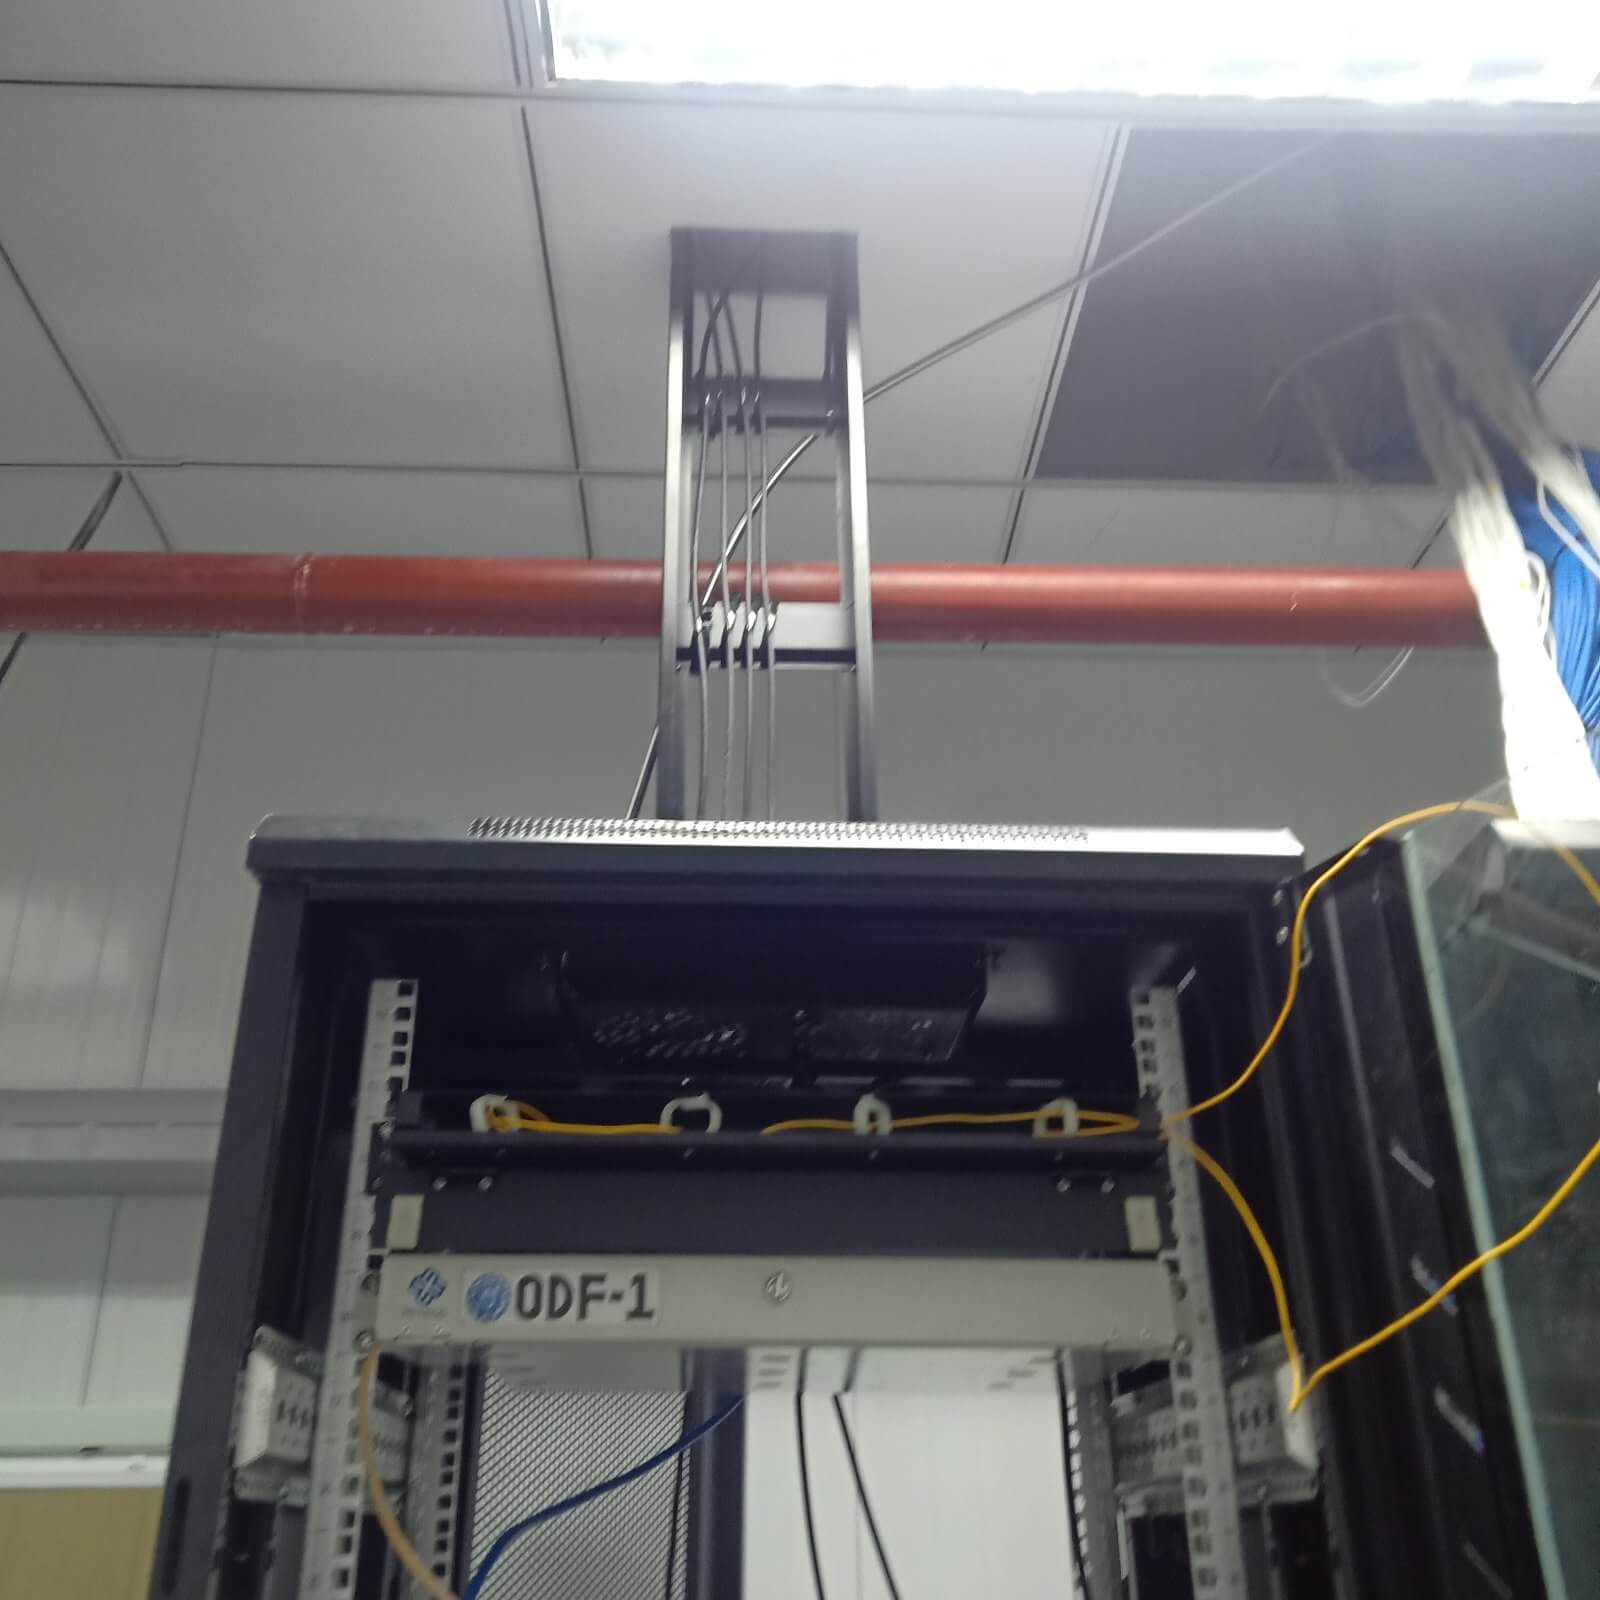 Structured cabling project photo 6